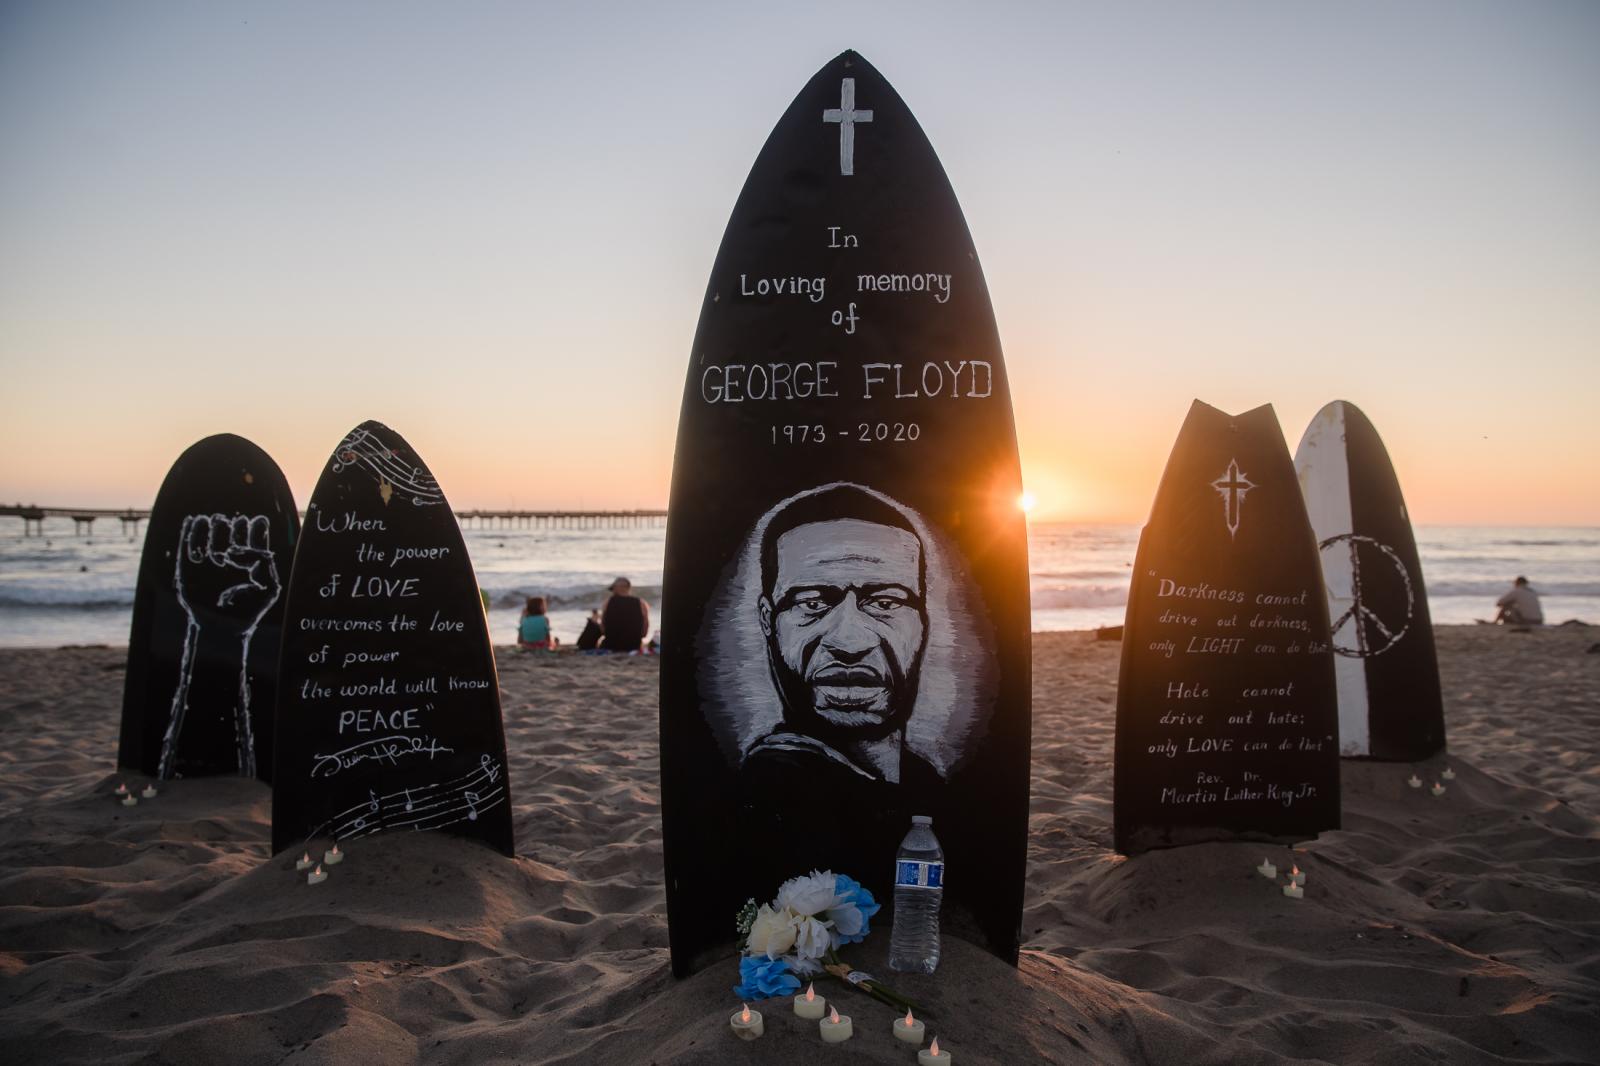 A makeshift memorial for George Floyd in Ocean Beach, California on July 5, 2020. Floyd died after being arrested in Minneapolis, Minnesota. Derek Chauvin a white police officer held his knee on Floyd&#39;s neck while he was pinned to the floor. Floyd repeatedly told the police officers that he could not breathe while he was restrained by police officers.